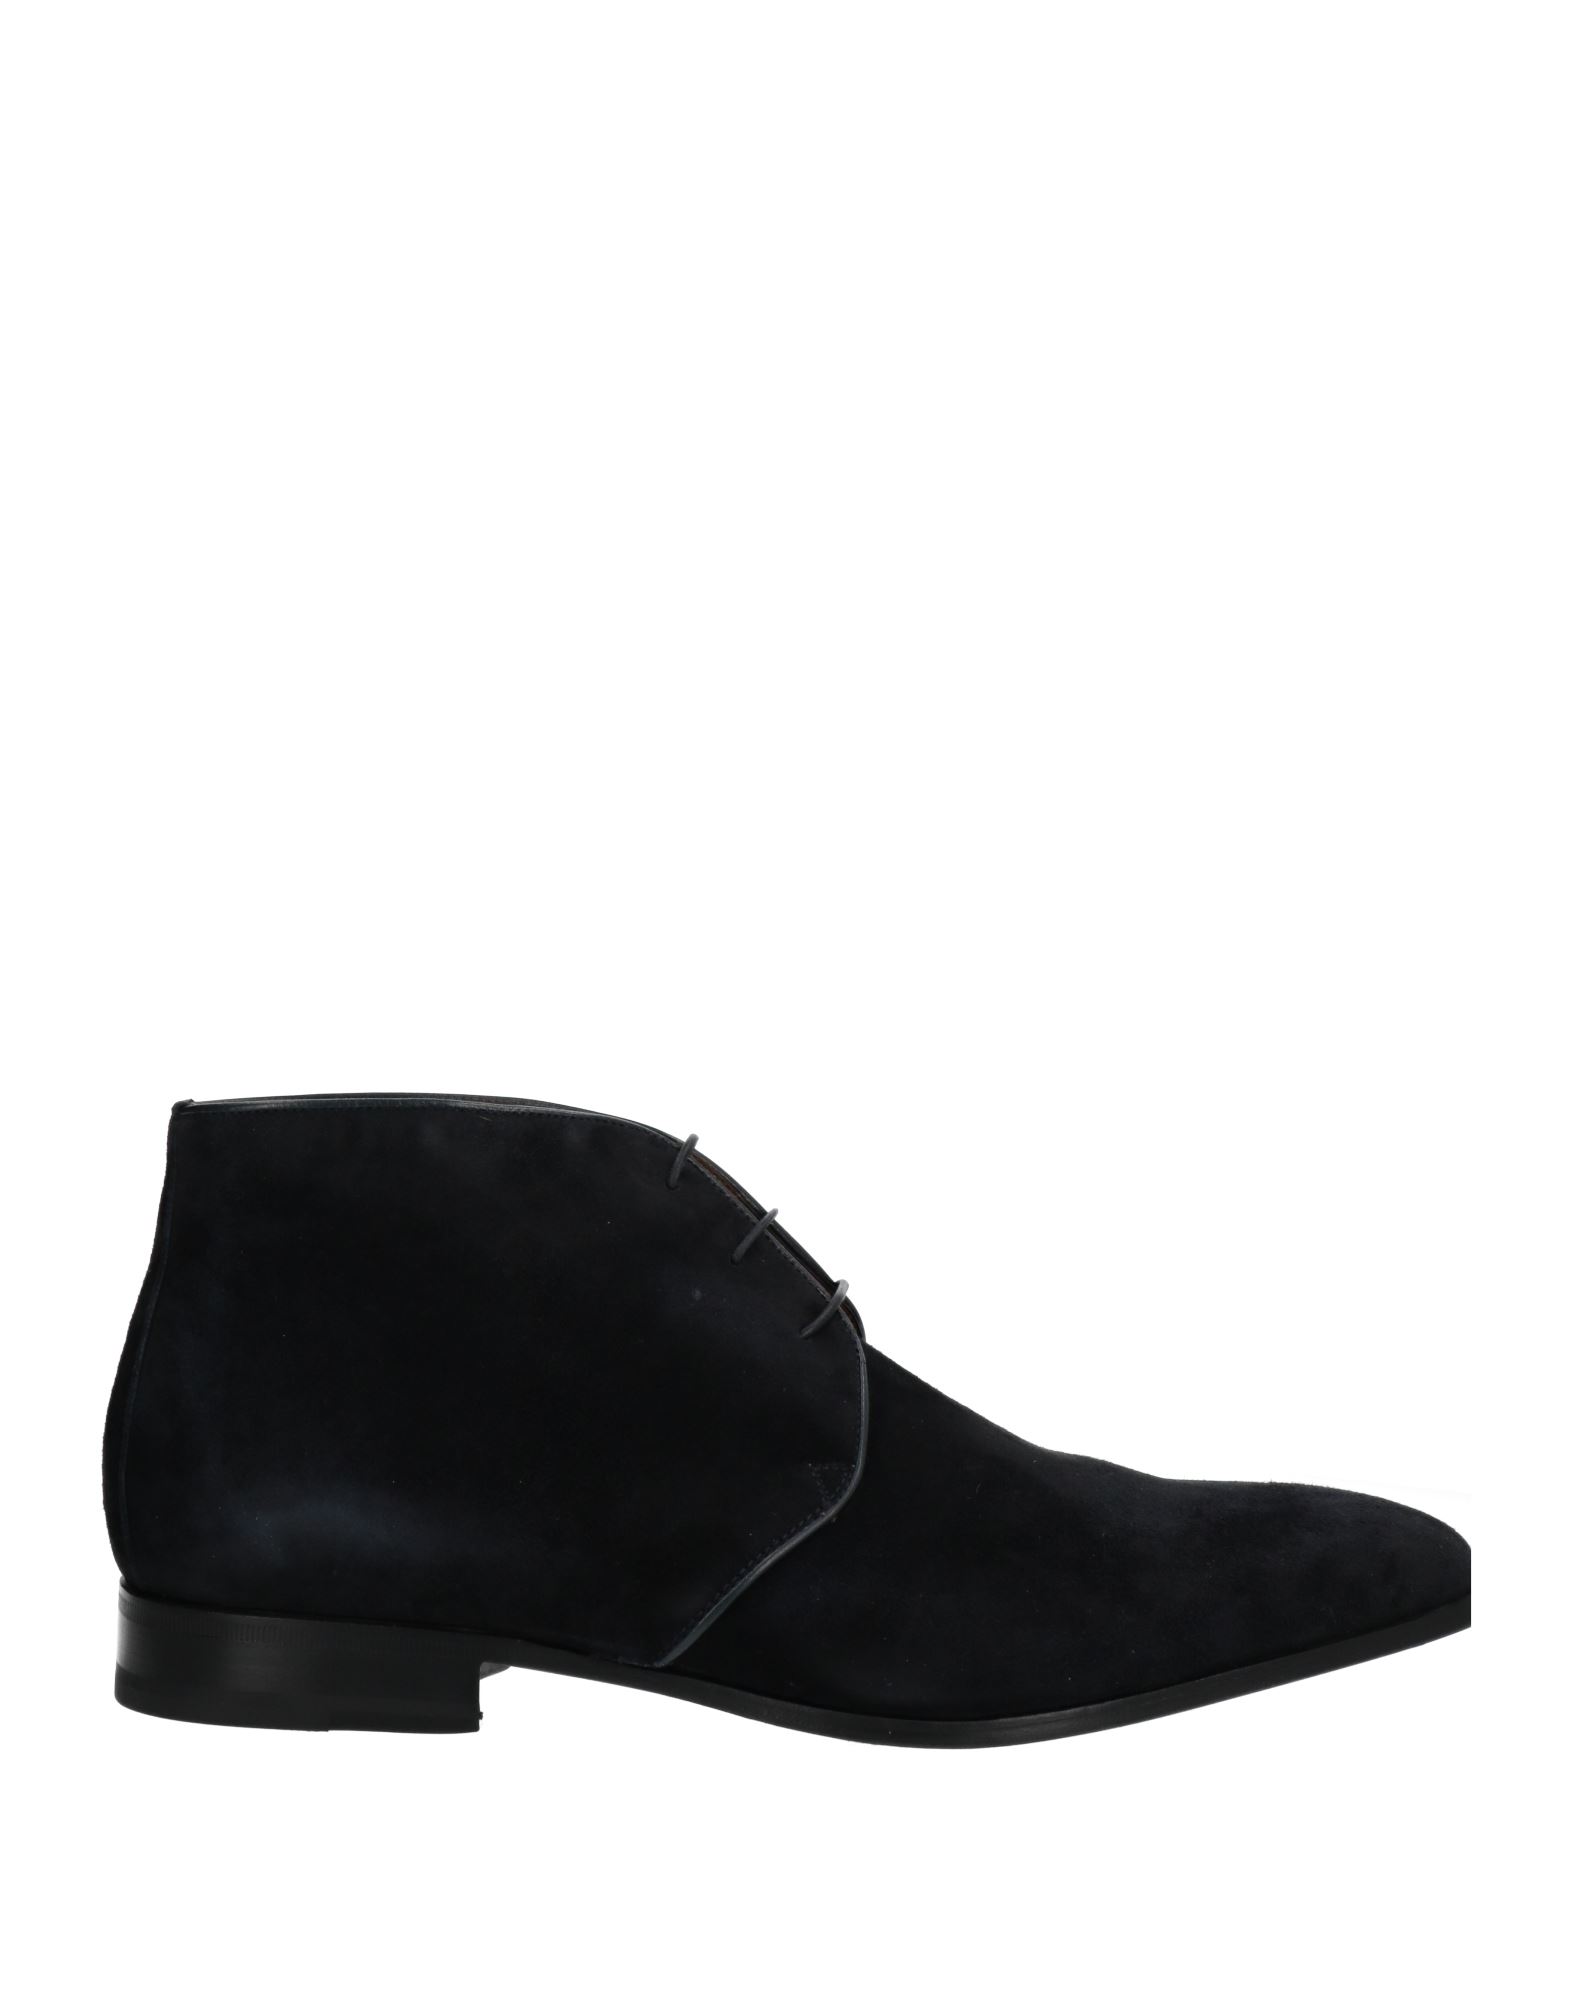 MORESCHI ANKLE BOOTS